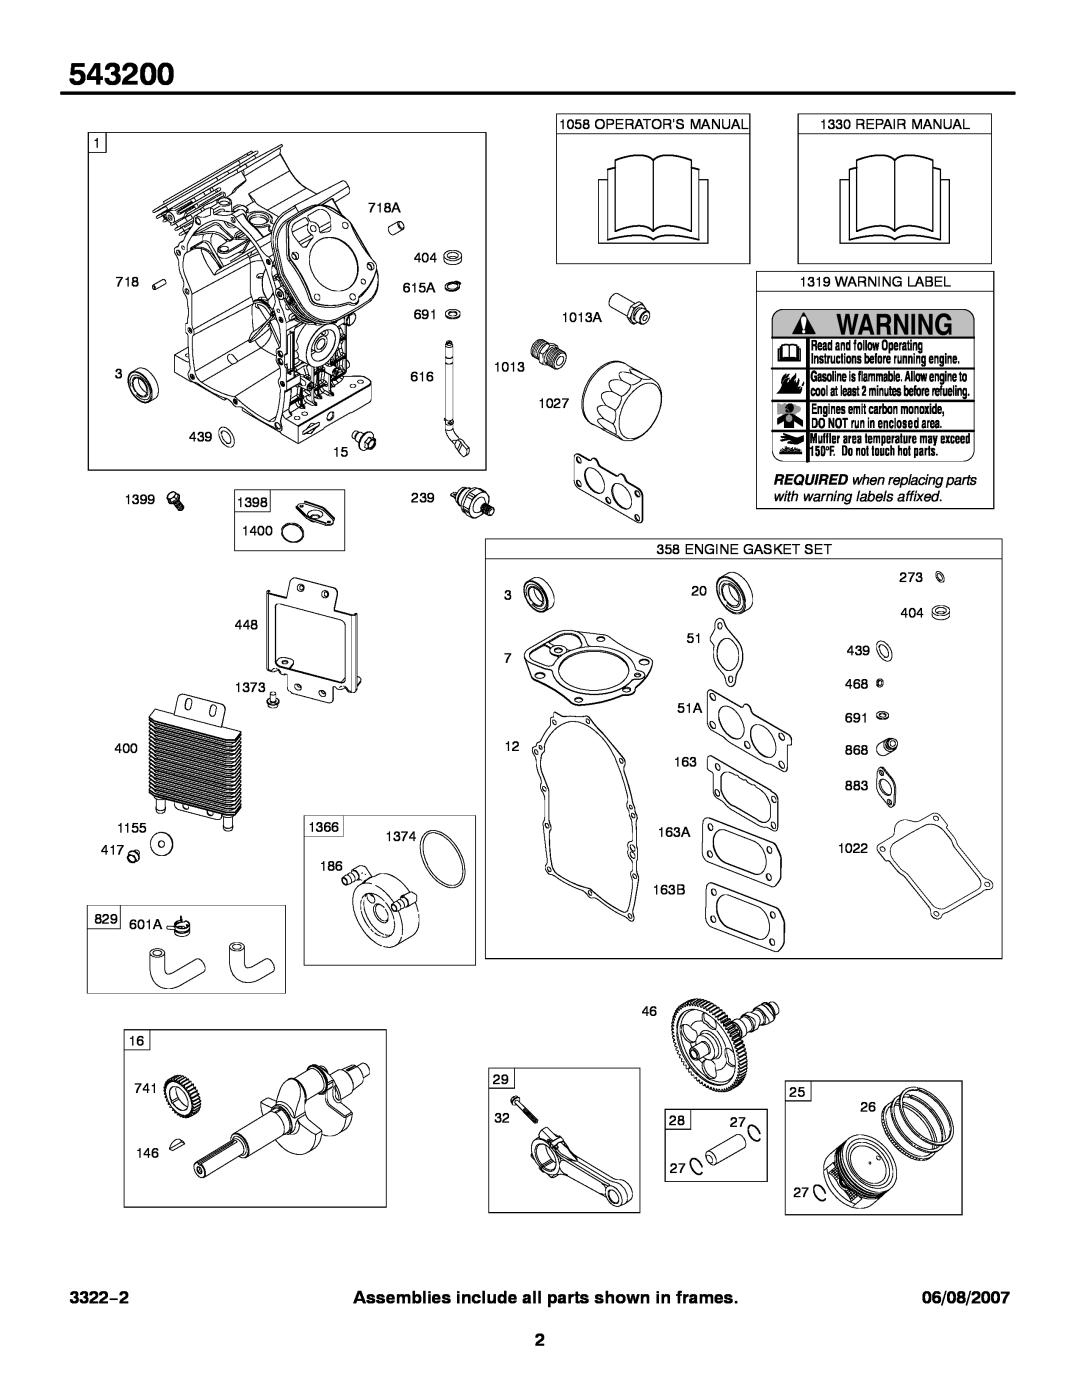 Briggs & Stratton 543200 3322−2, Assemblies include all parts shown in frames, 06/08/2007, with warning labels affixed 